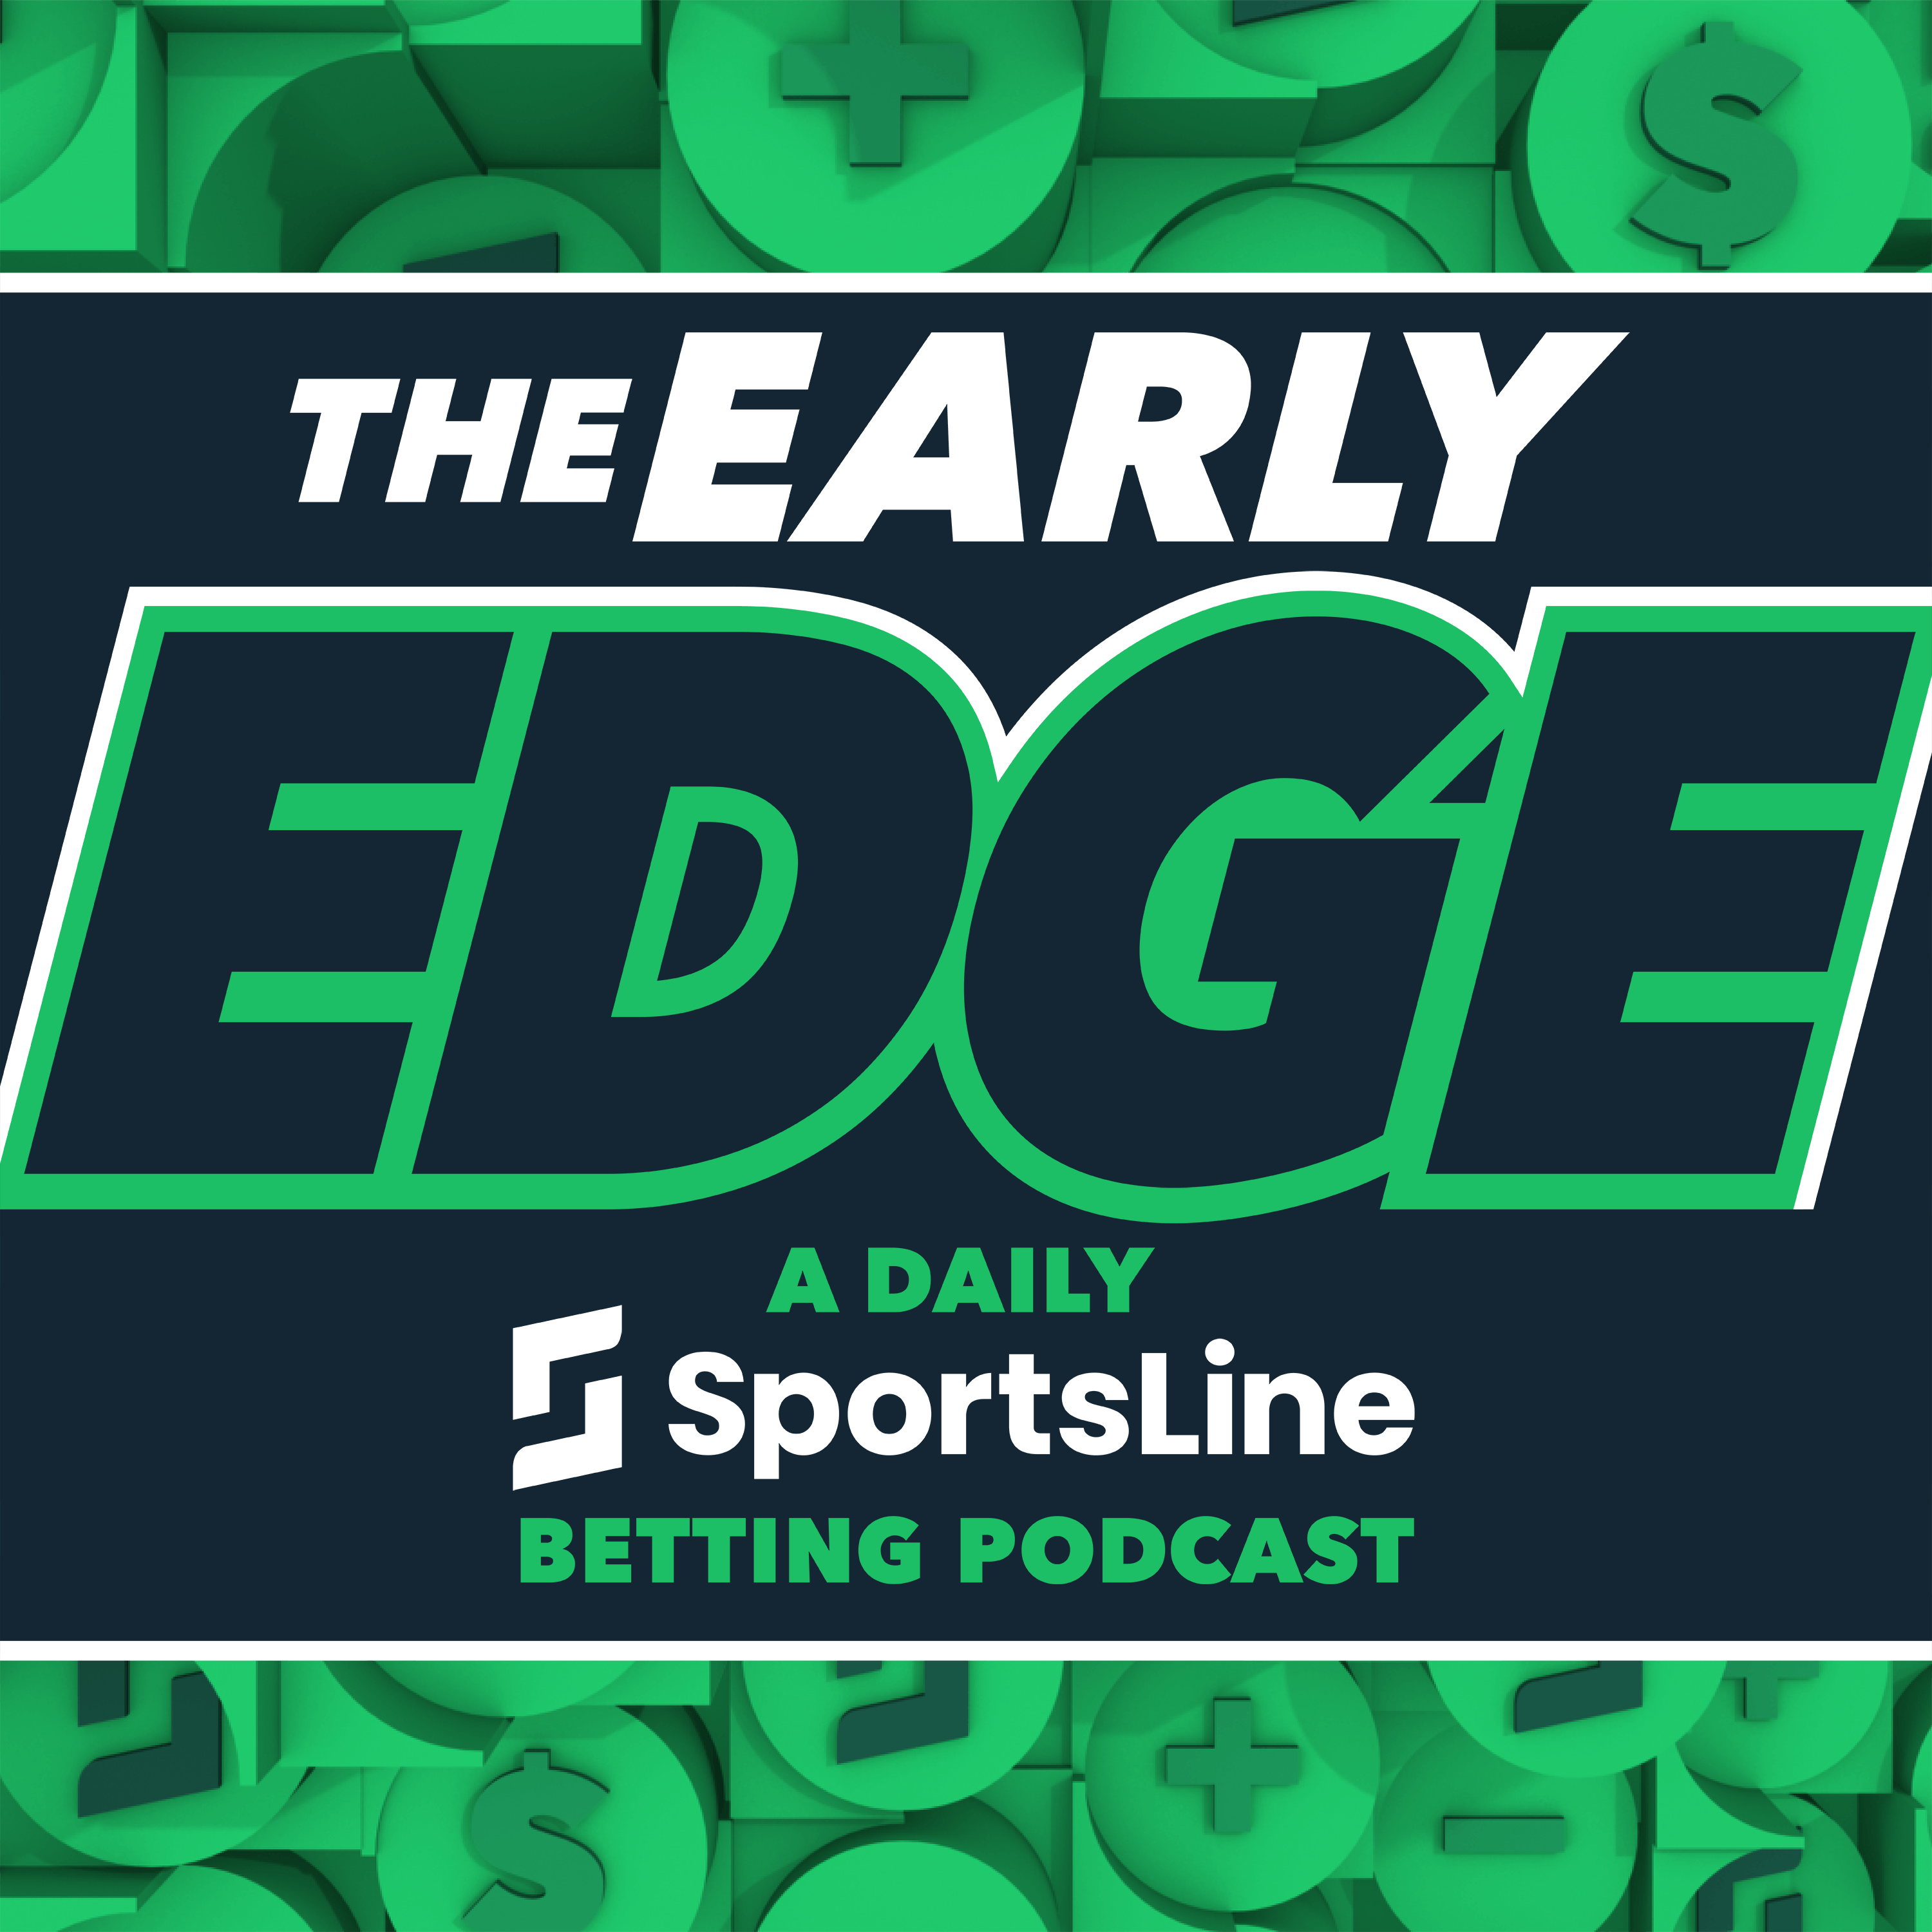 Friday's BEST BETS: Women's Final Four Picks + MLB and More! | The Early Edge